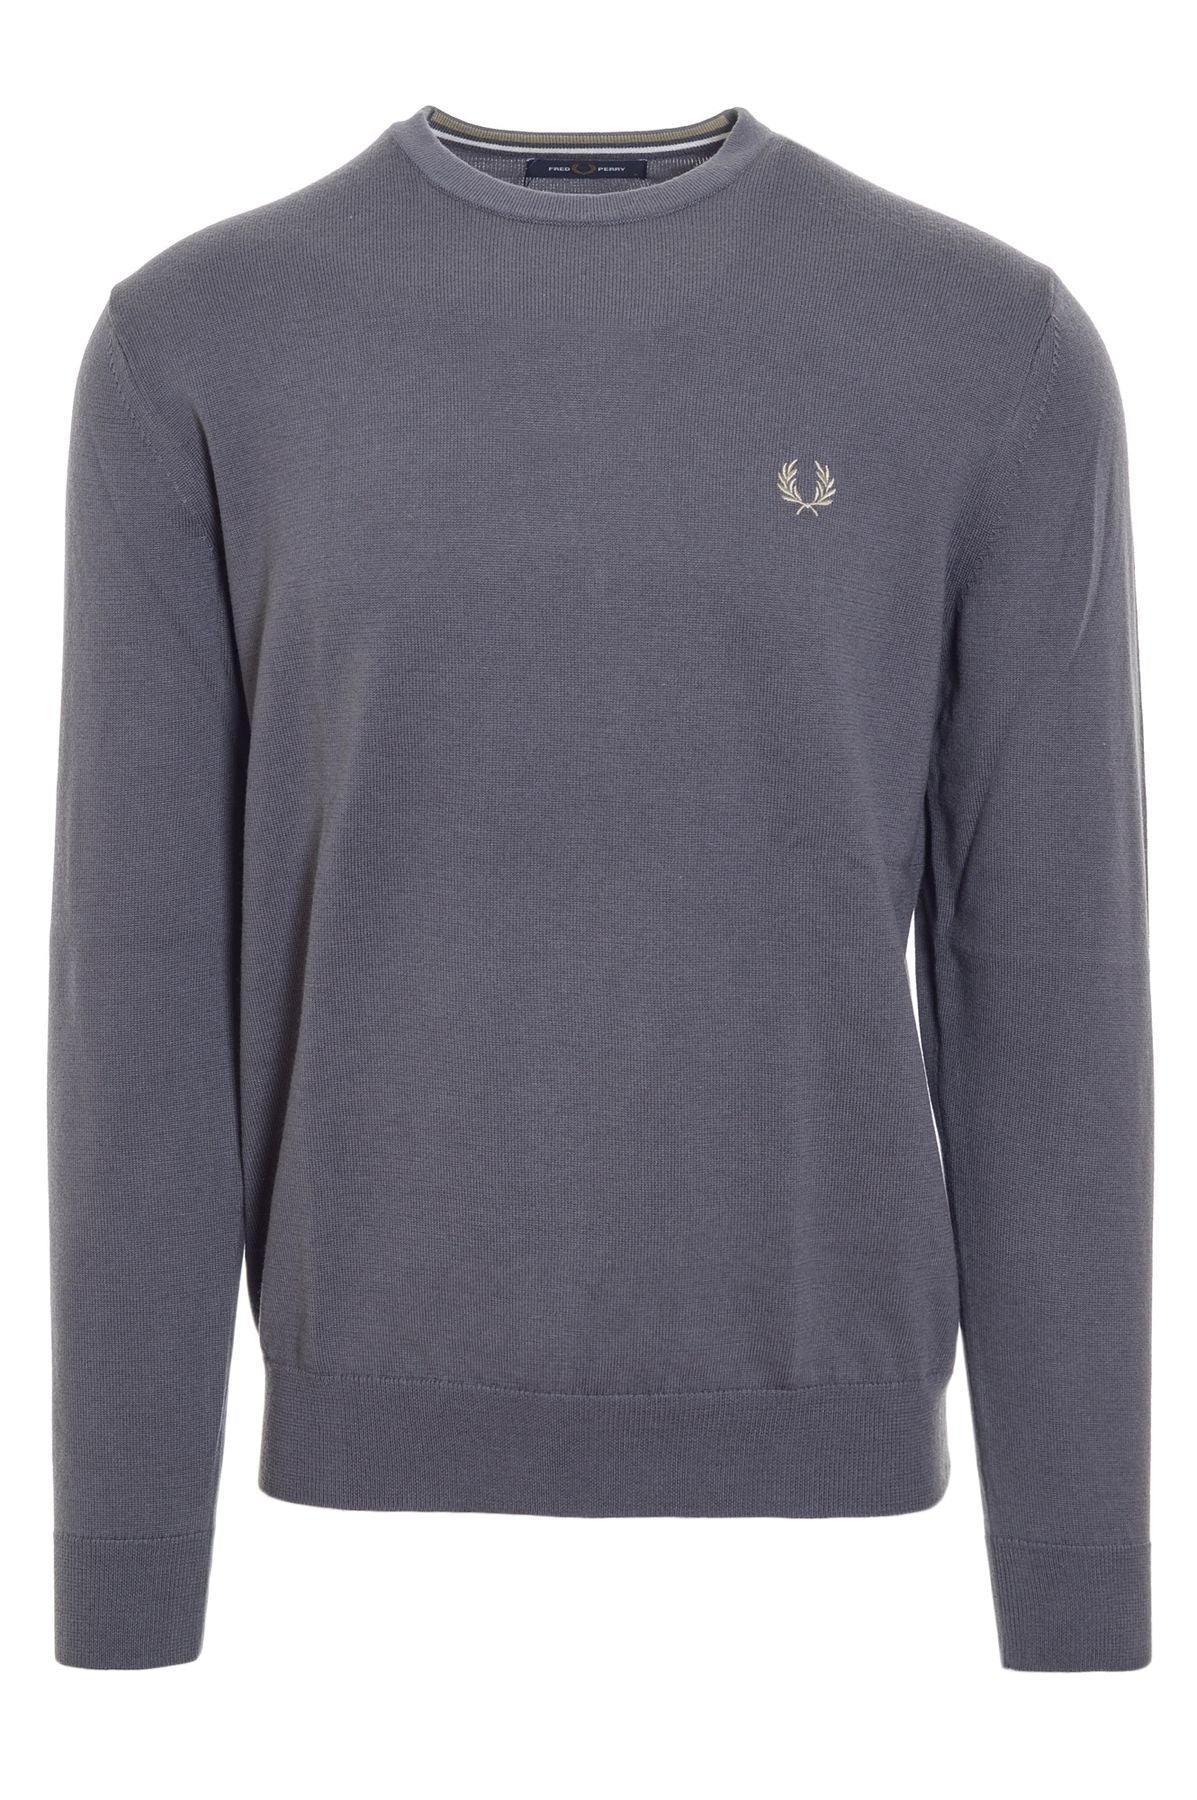 FRED PERRY Maglie Autunno/Inverno k9601